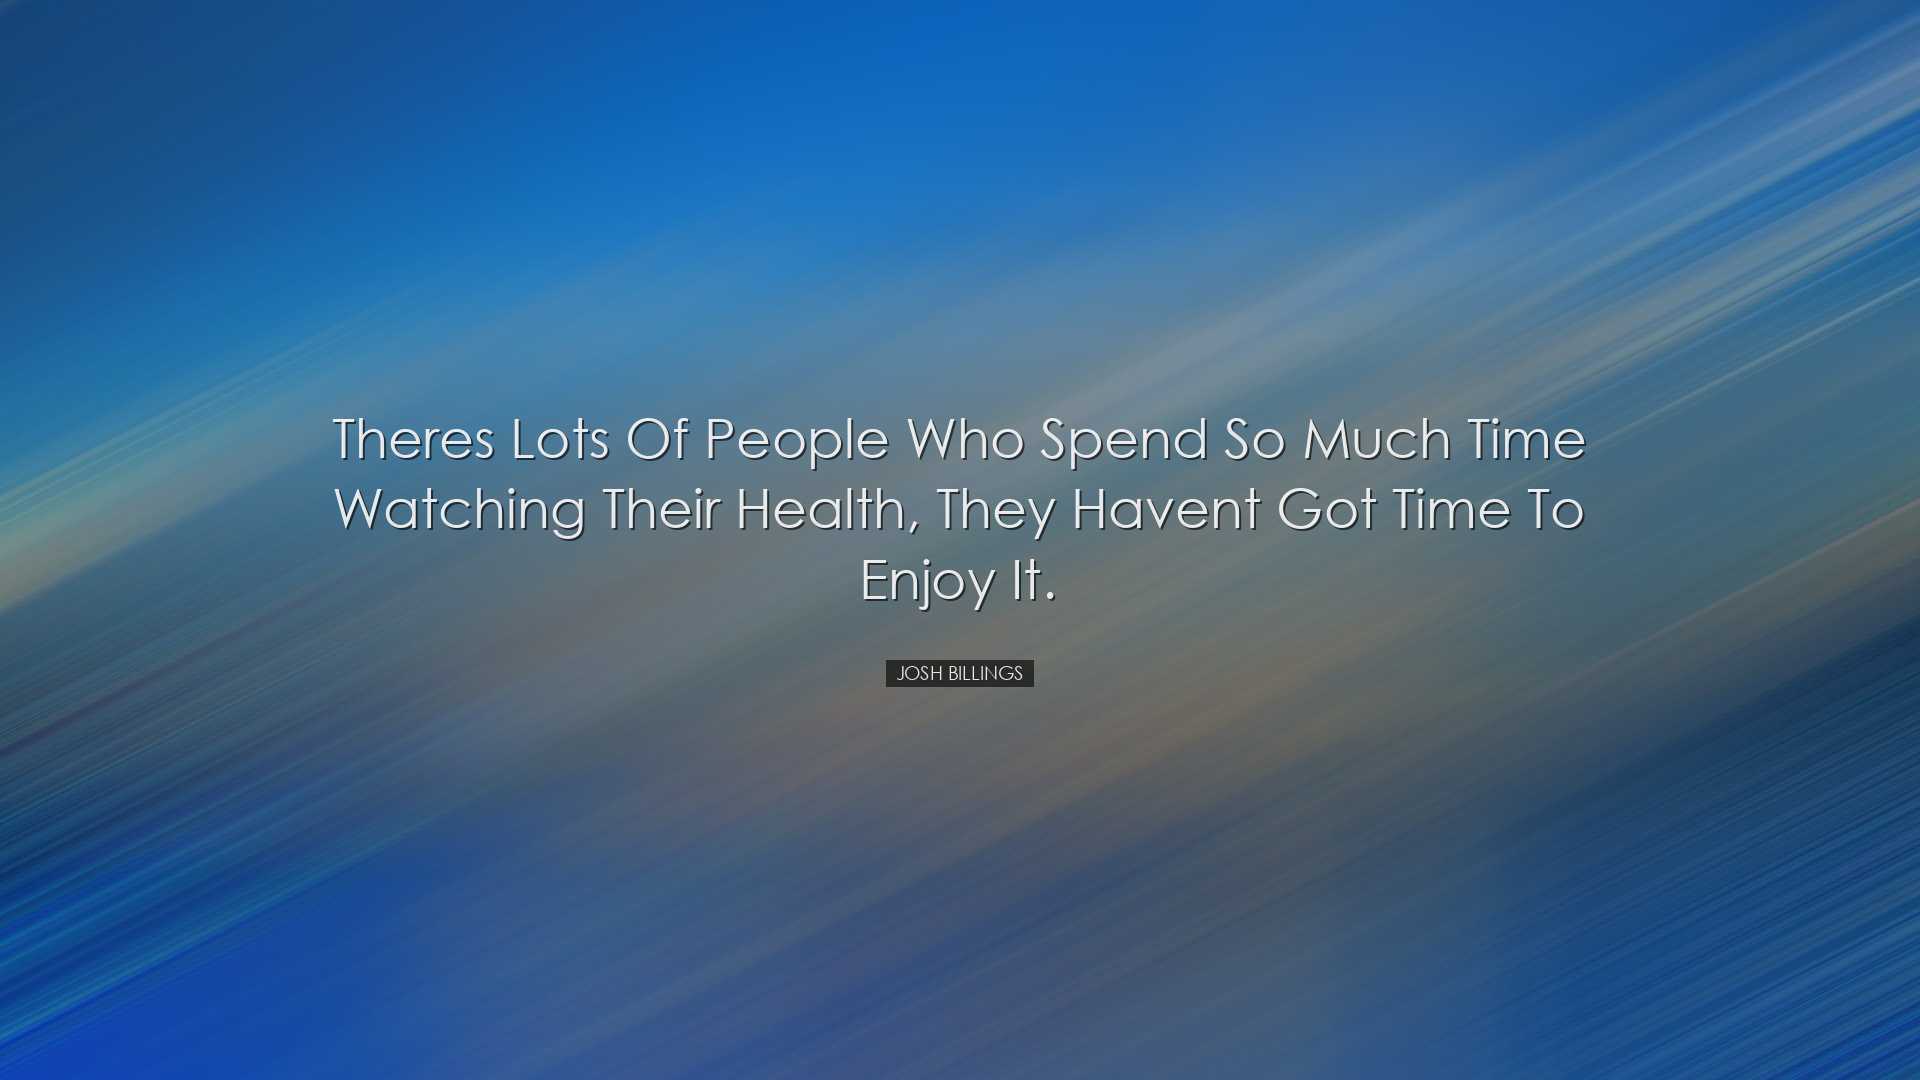 Theres lots of people who spend so much time watching their health